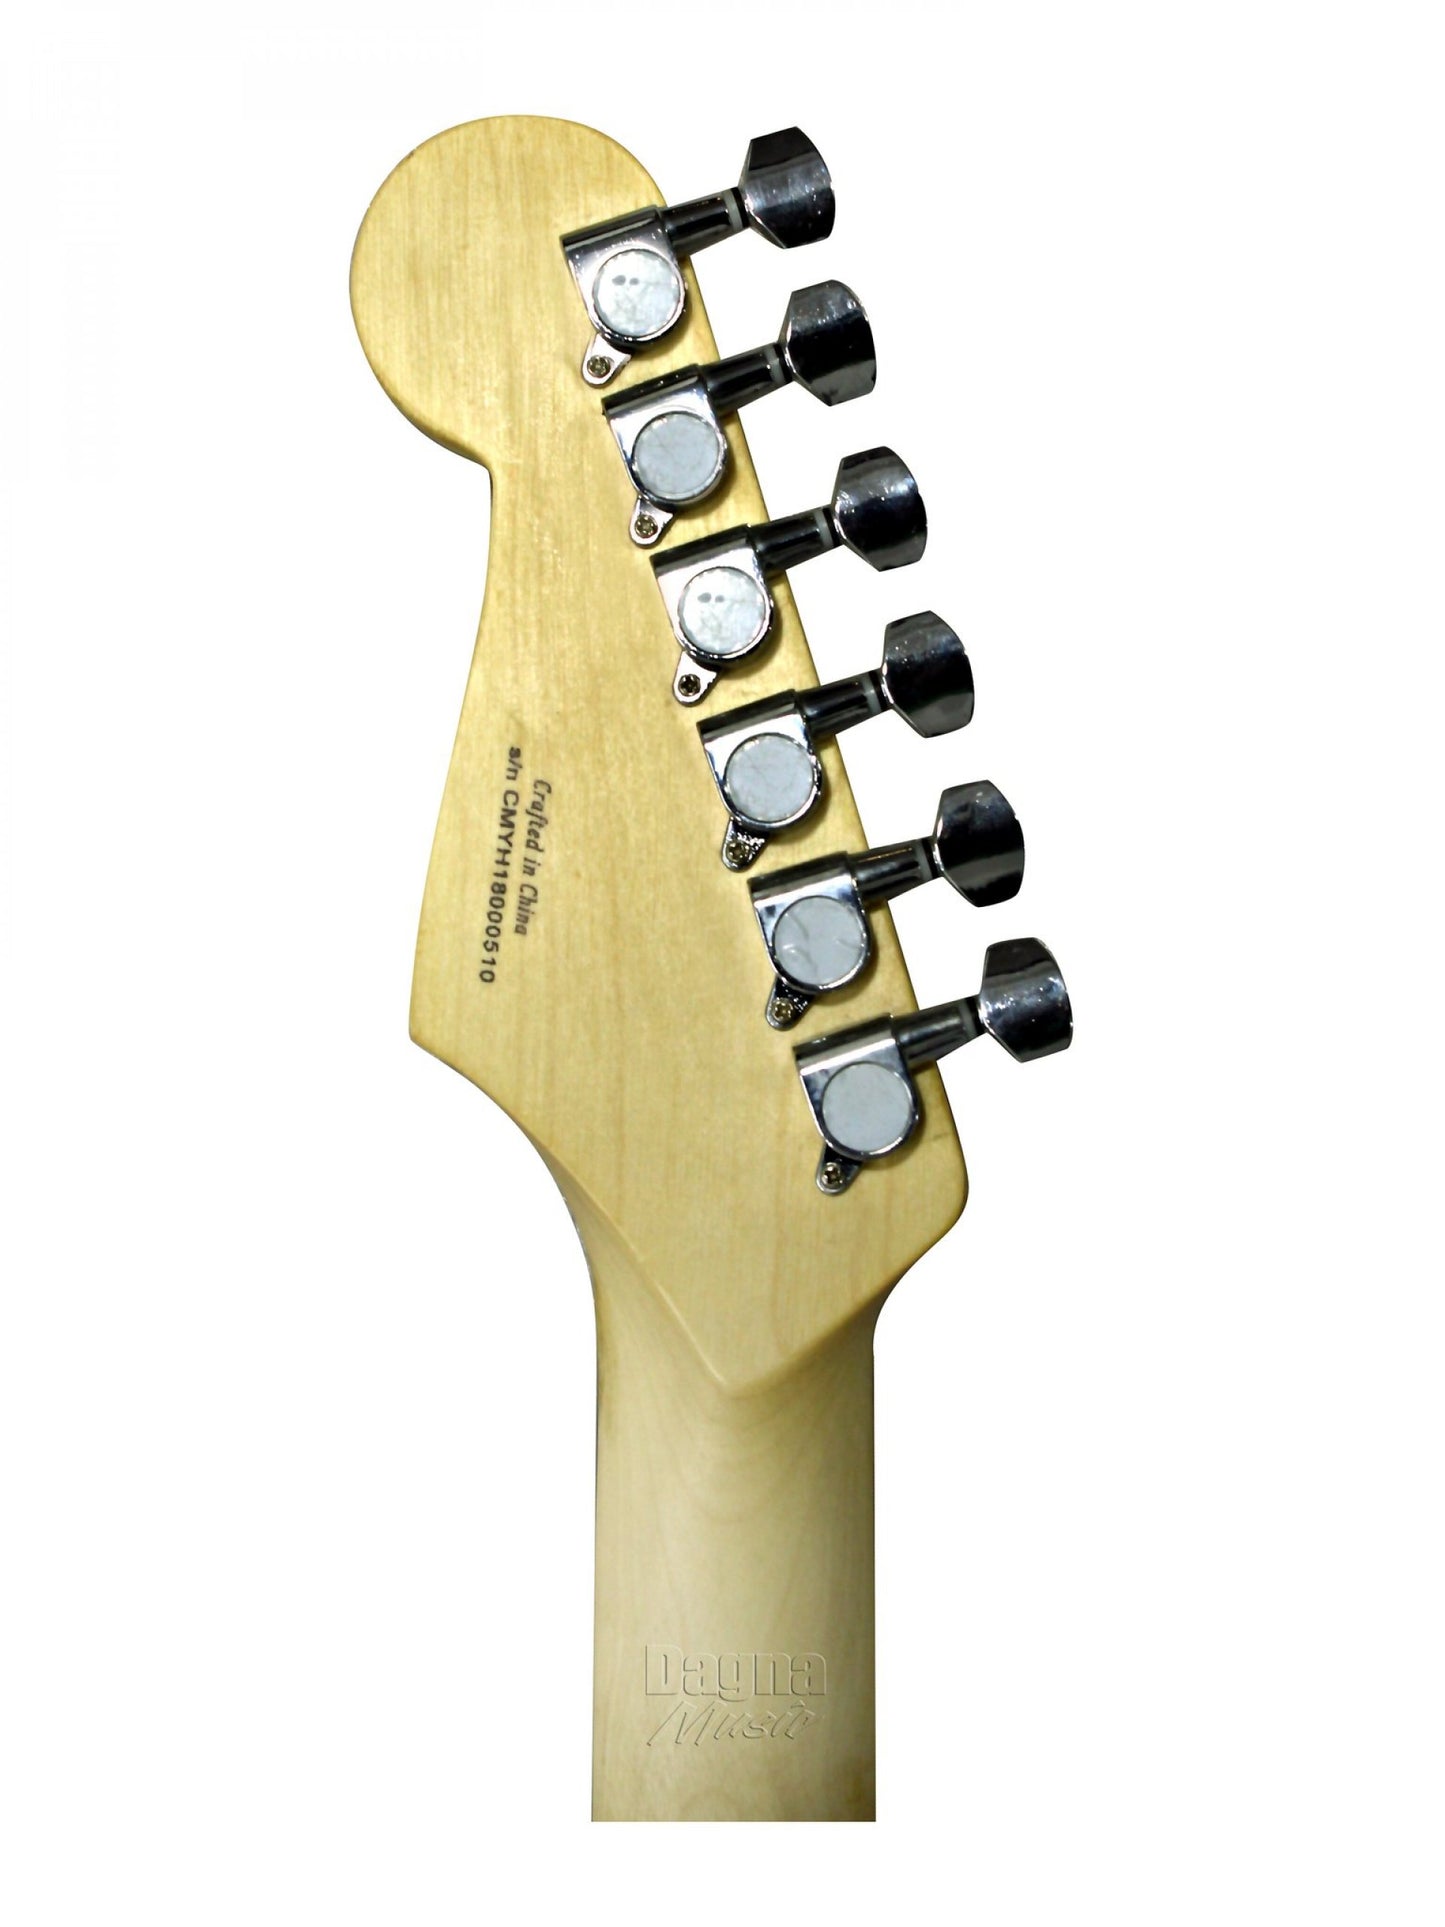 Fender 0370910506 & 0370910558 Squier MM Stratocaster 6-String Electric Guitar with Maple Neck